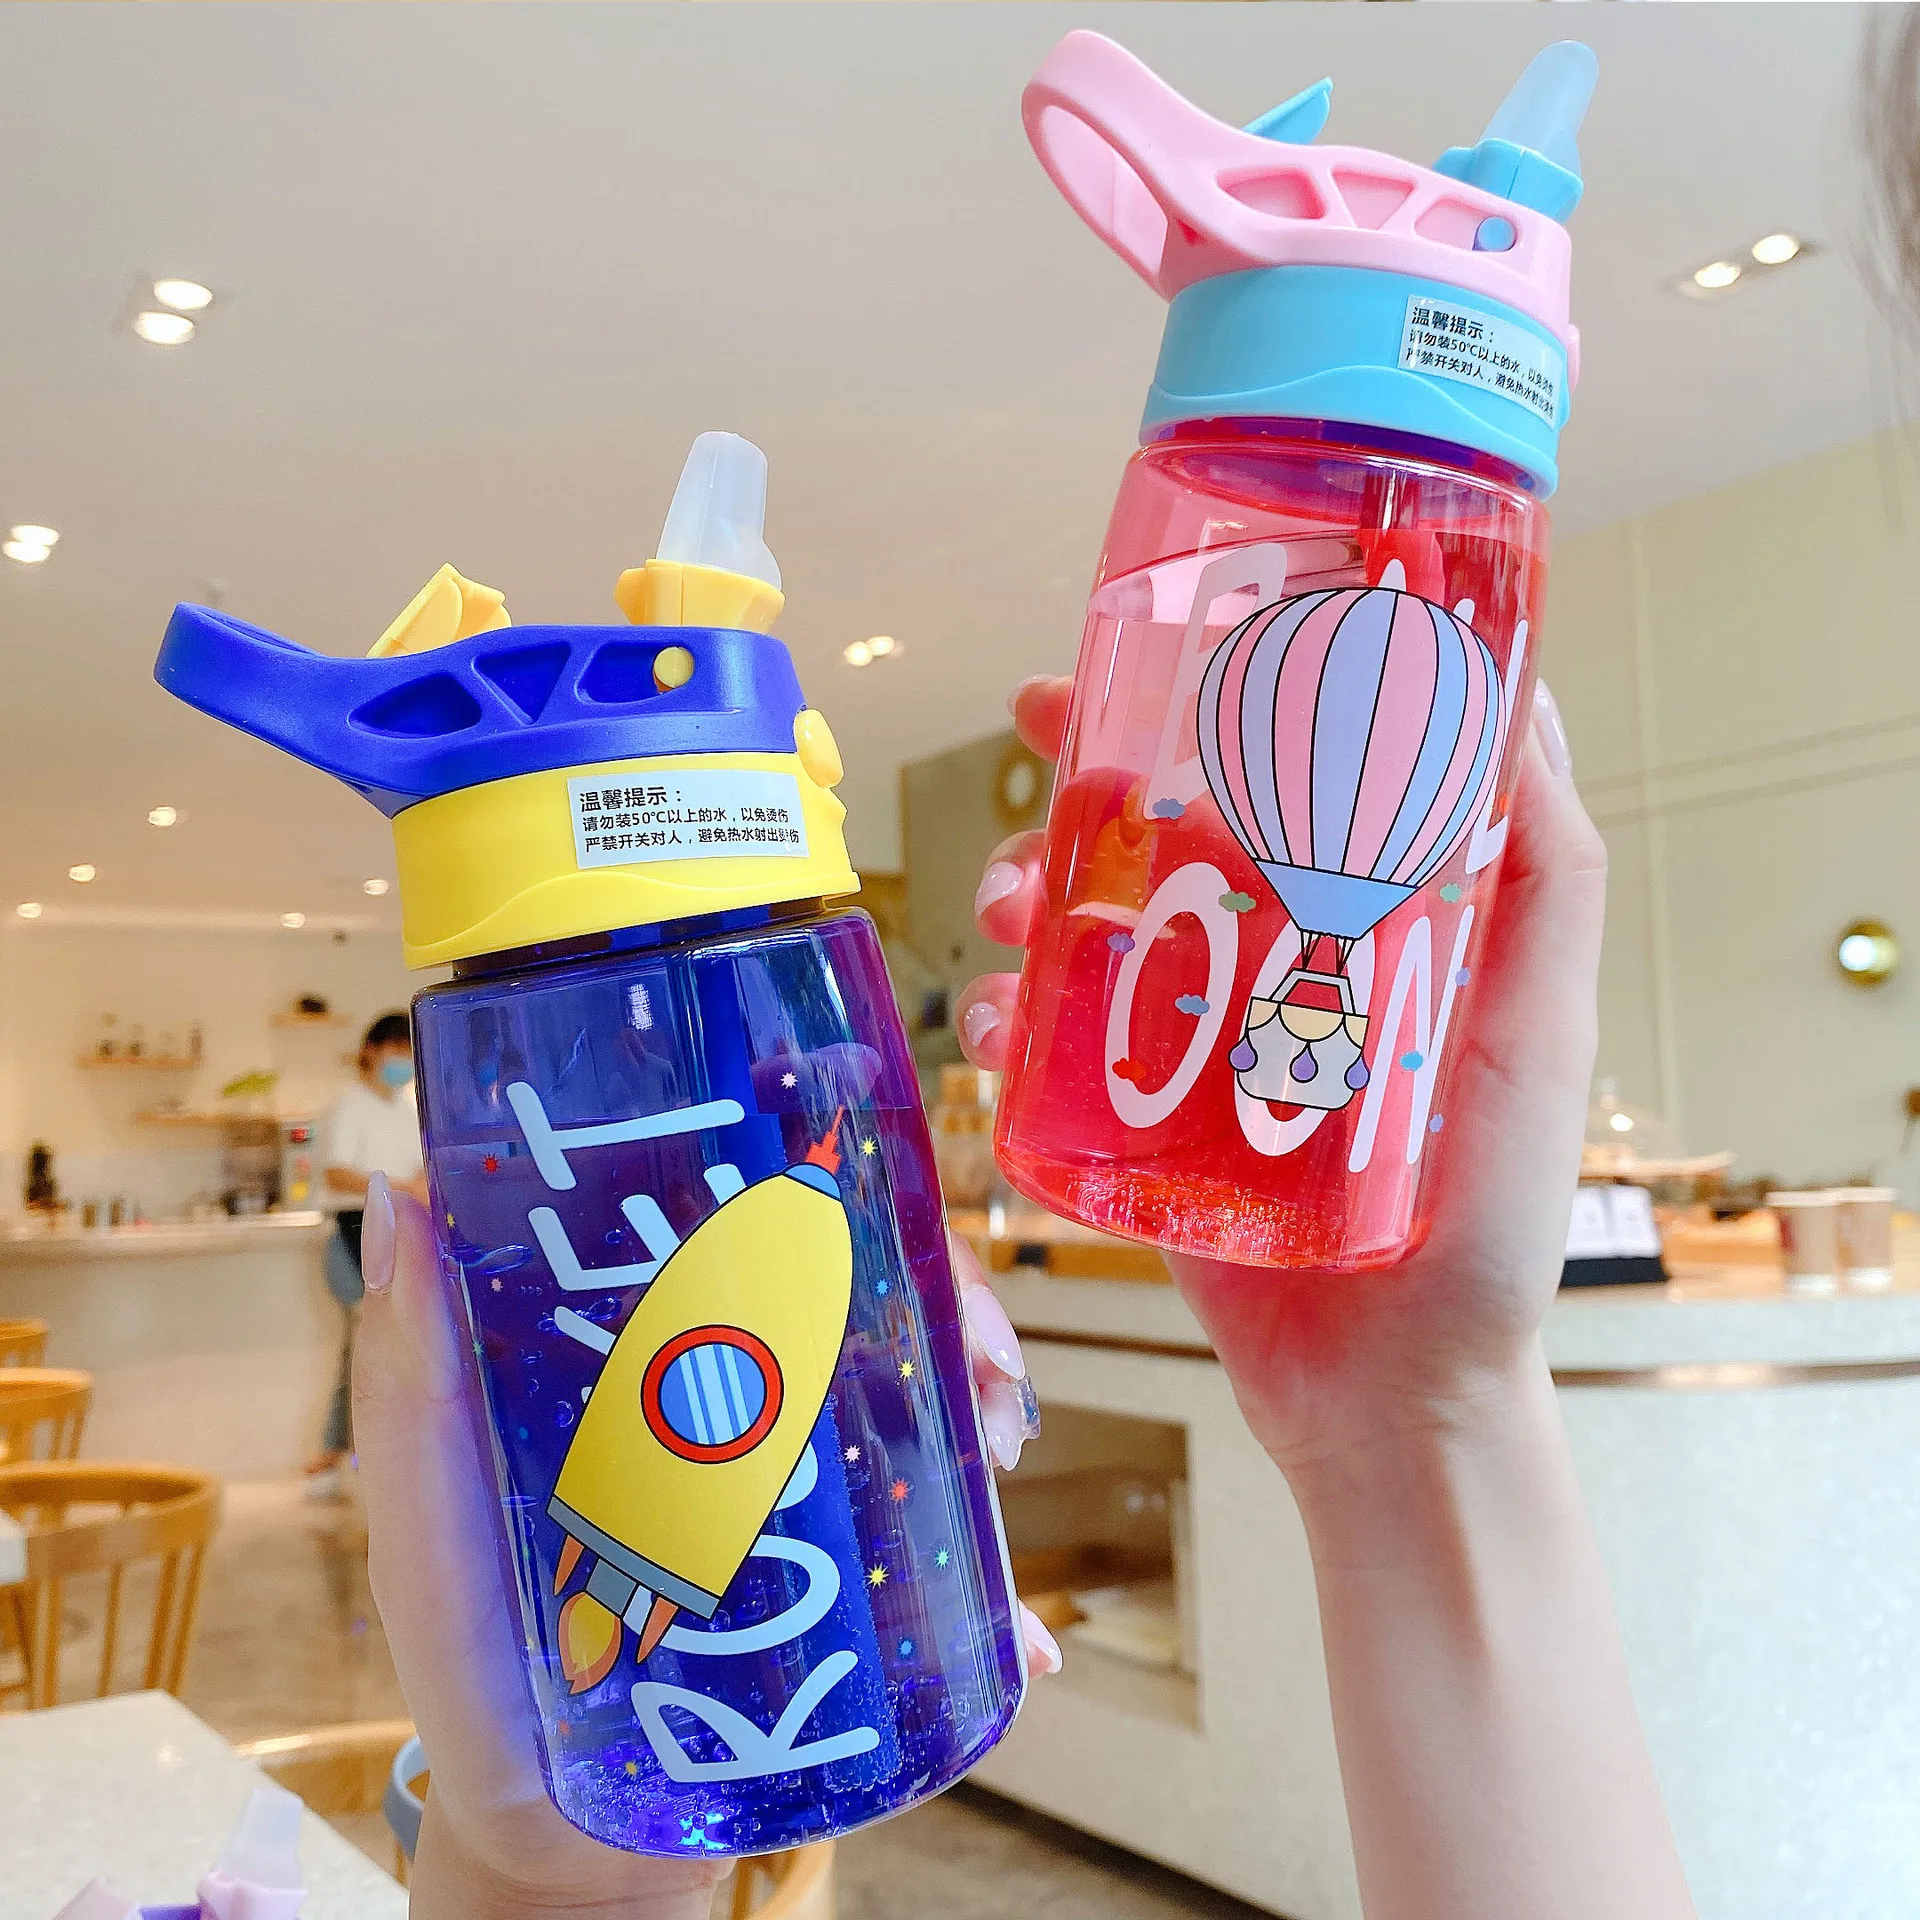 https://ae01.alicdn.com/kf/Sefdaf817d8df4f8f81aeaebd986c80d38/Kids-Water-Sippy-Cup-Cartoon-Animal-Baby-Feeding-Cups-with-Straws-Leakproof-Water-Bottles-Outdoor-Portable.jpg